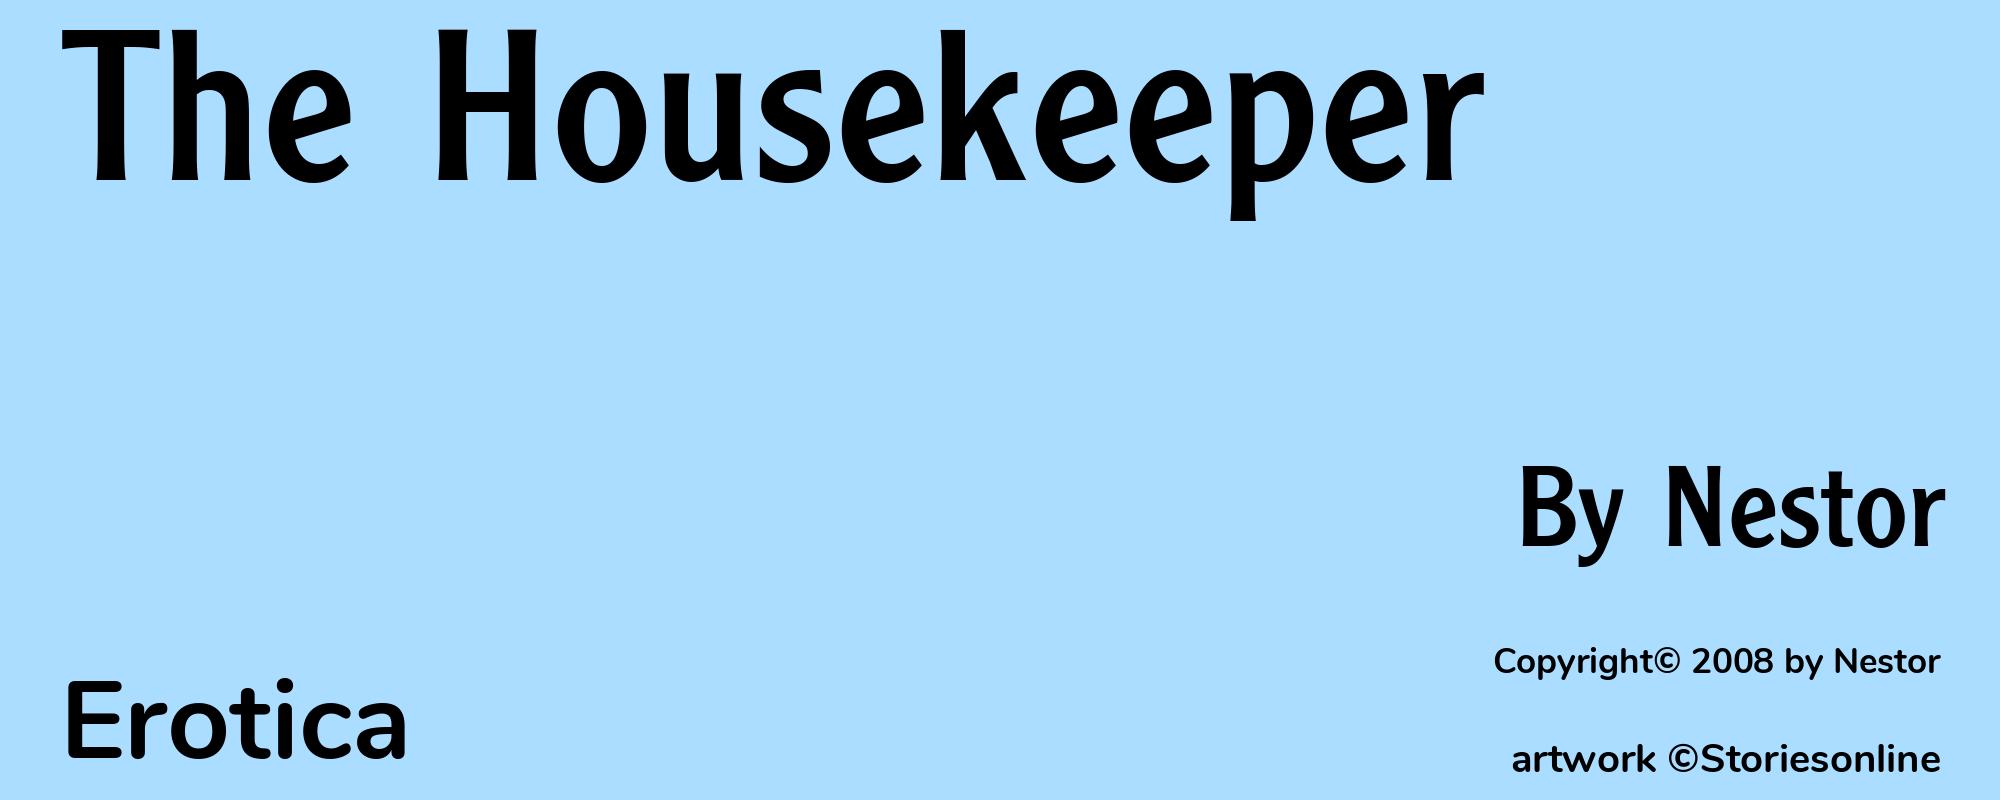 The Housekeeper - Cover